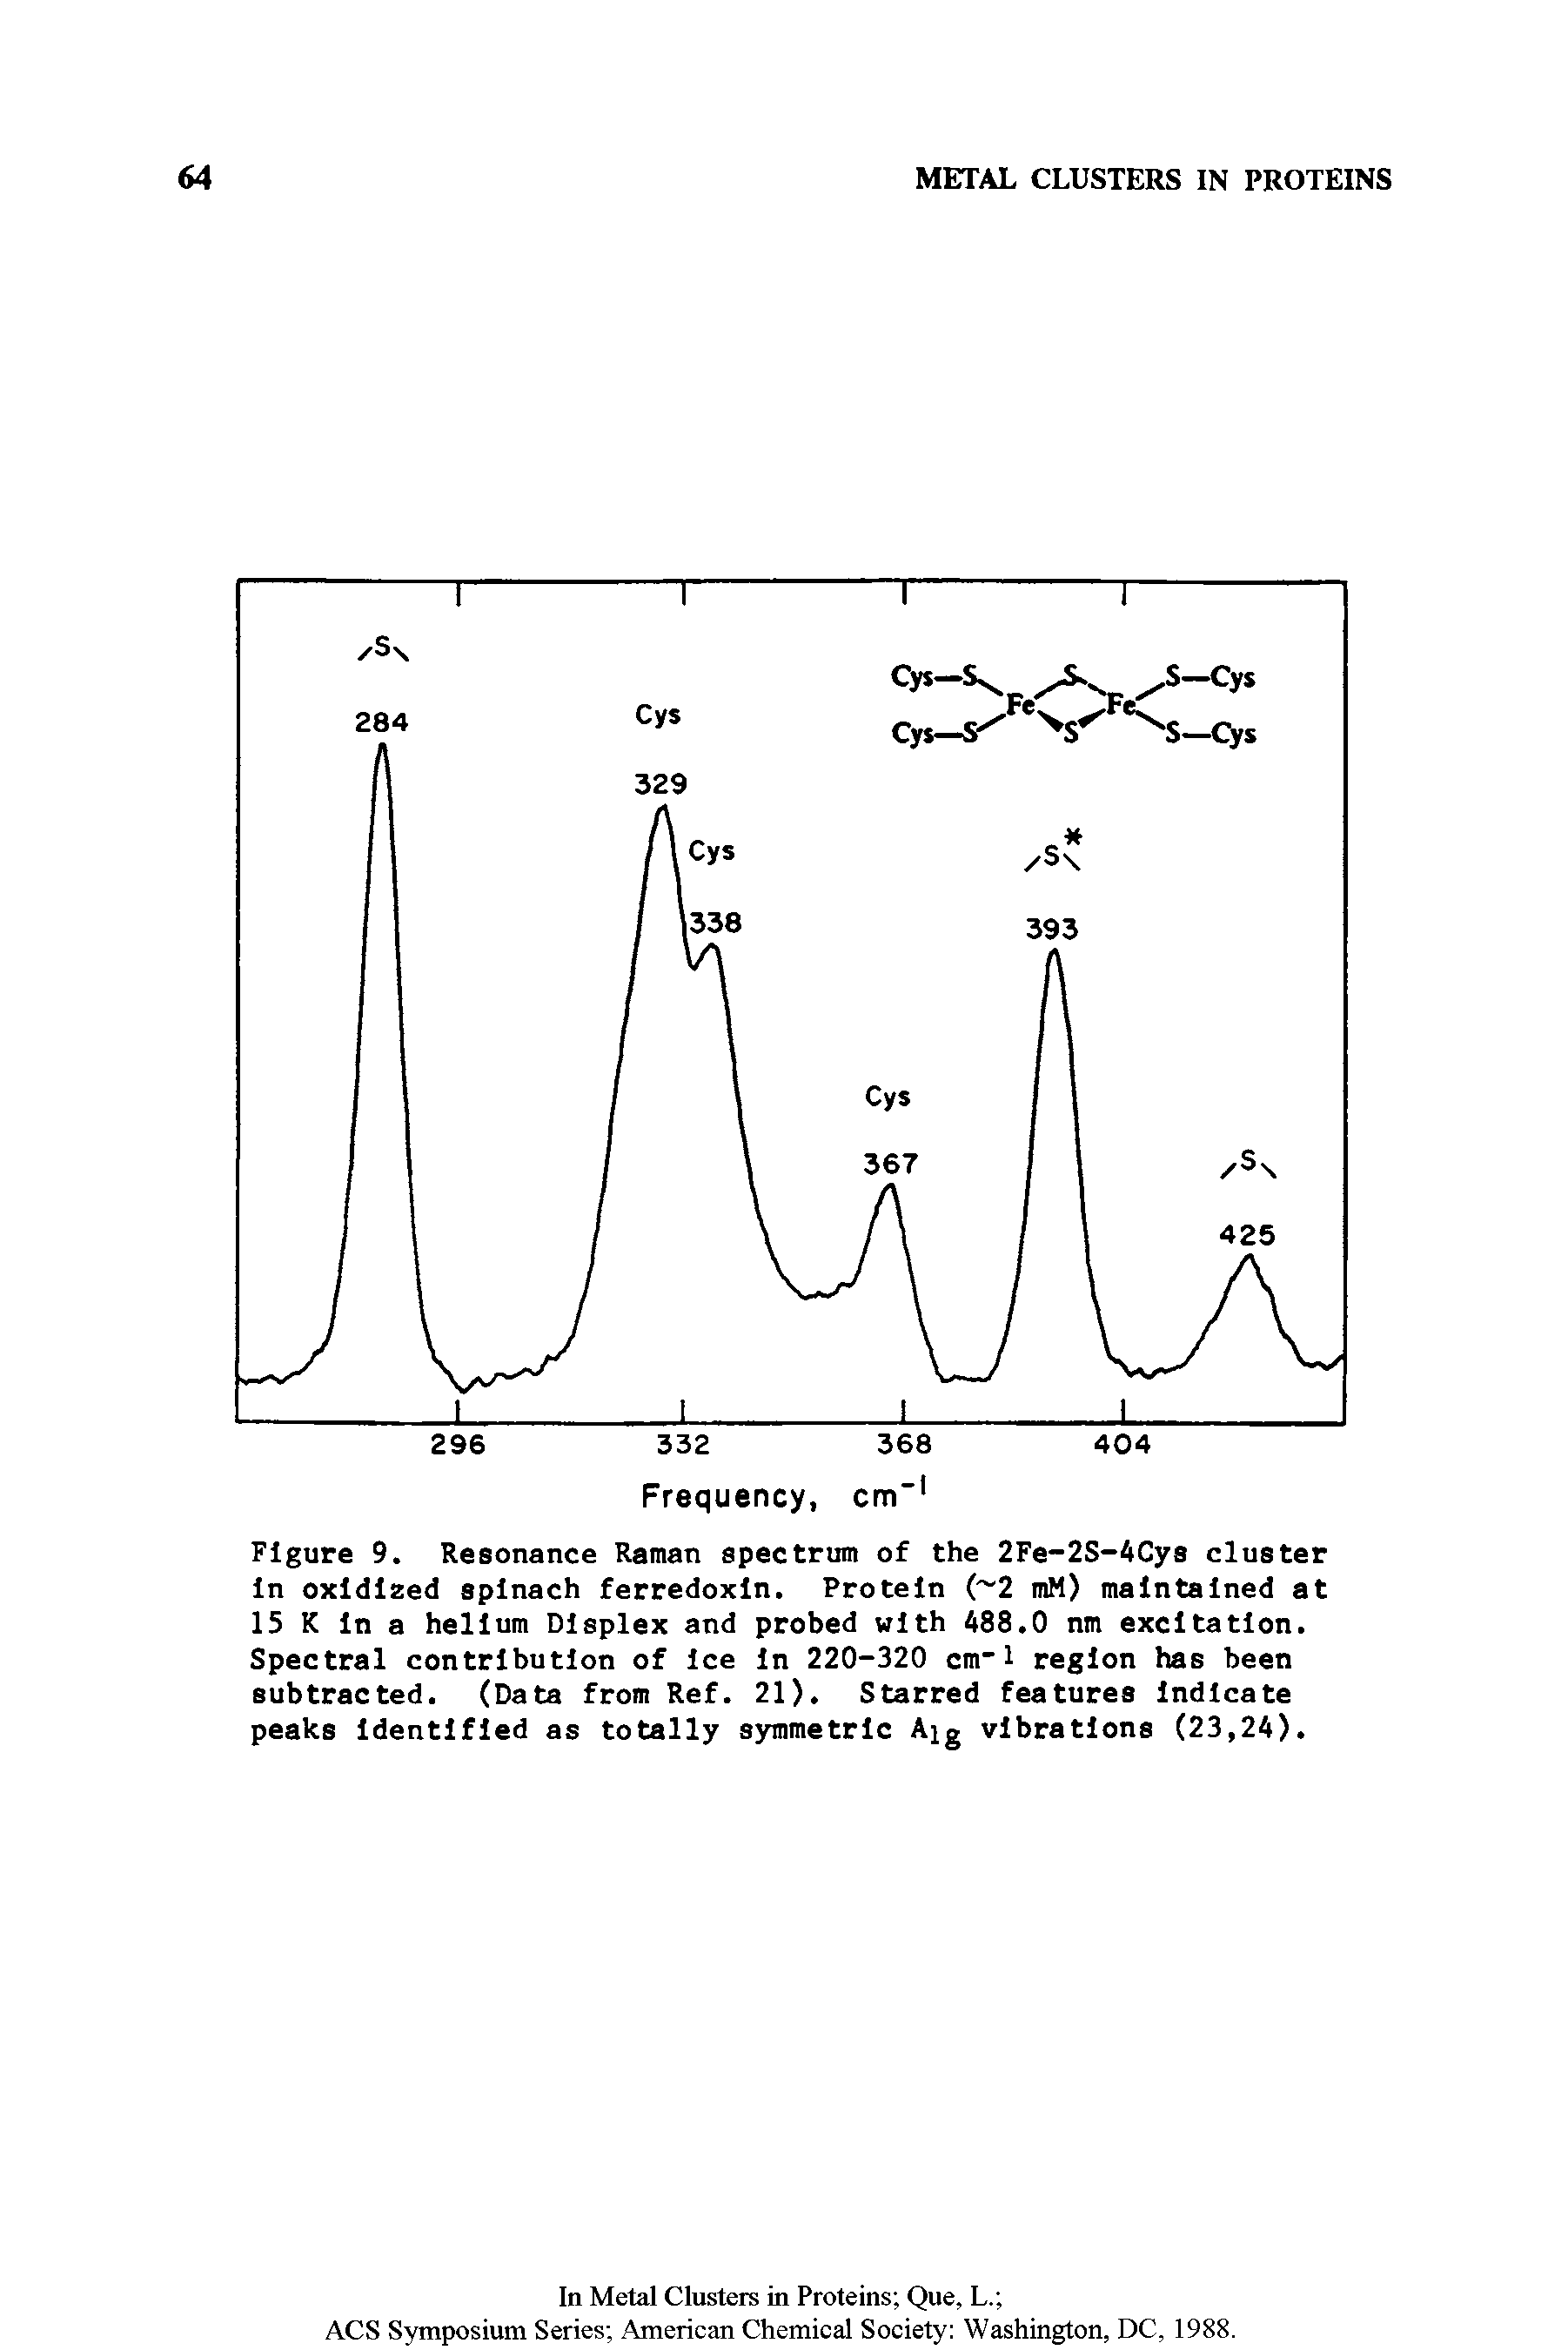 Figure 9. Resonance Raman spectrum of the 2Fe-2S-4Cys cluster In oxidized spinach ferredoxln. Protein ( 2 mM) maintained at 15 K In a helium Dlsplex and probed with 488.0 nm excitation. Spectral contribution of Ice In 220-320 cm" 1 region has been subtracted. (Data from Ref. 21). Starred features Indicate peaks Identified as totally symmetric Aig vibrations (23,24).